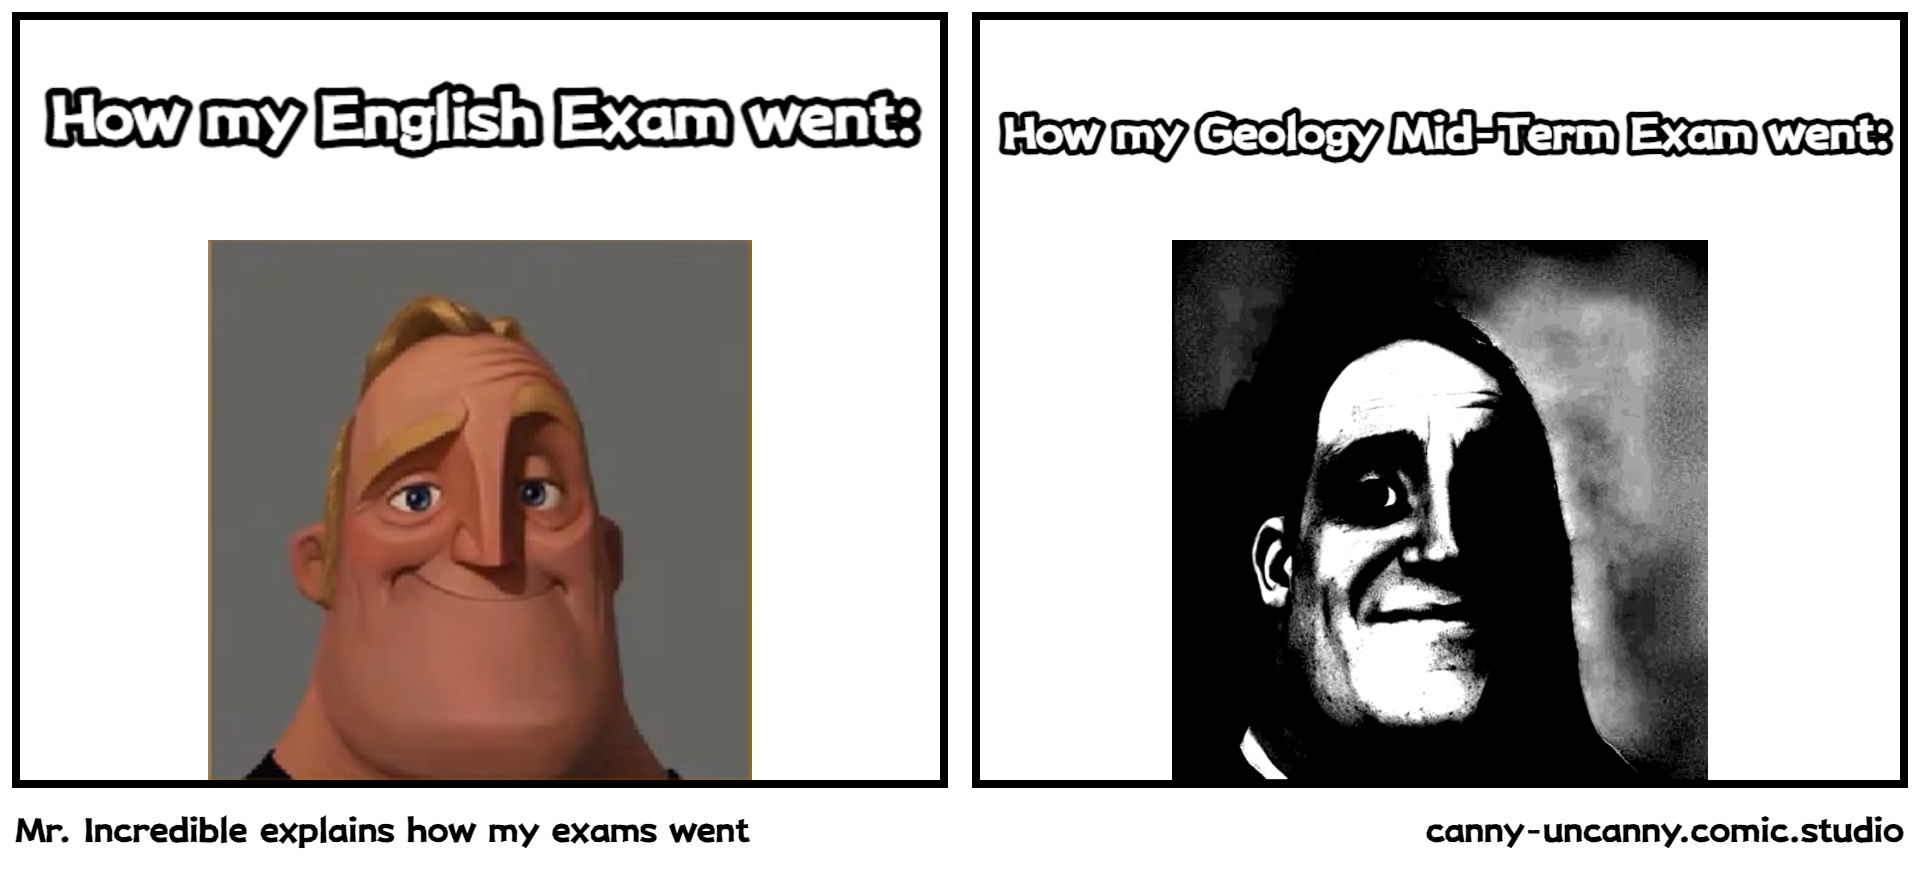 Mr. Incredible explains how my exams went